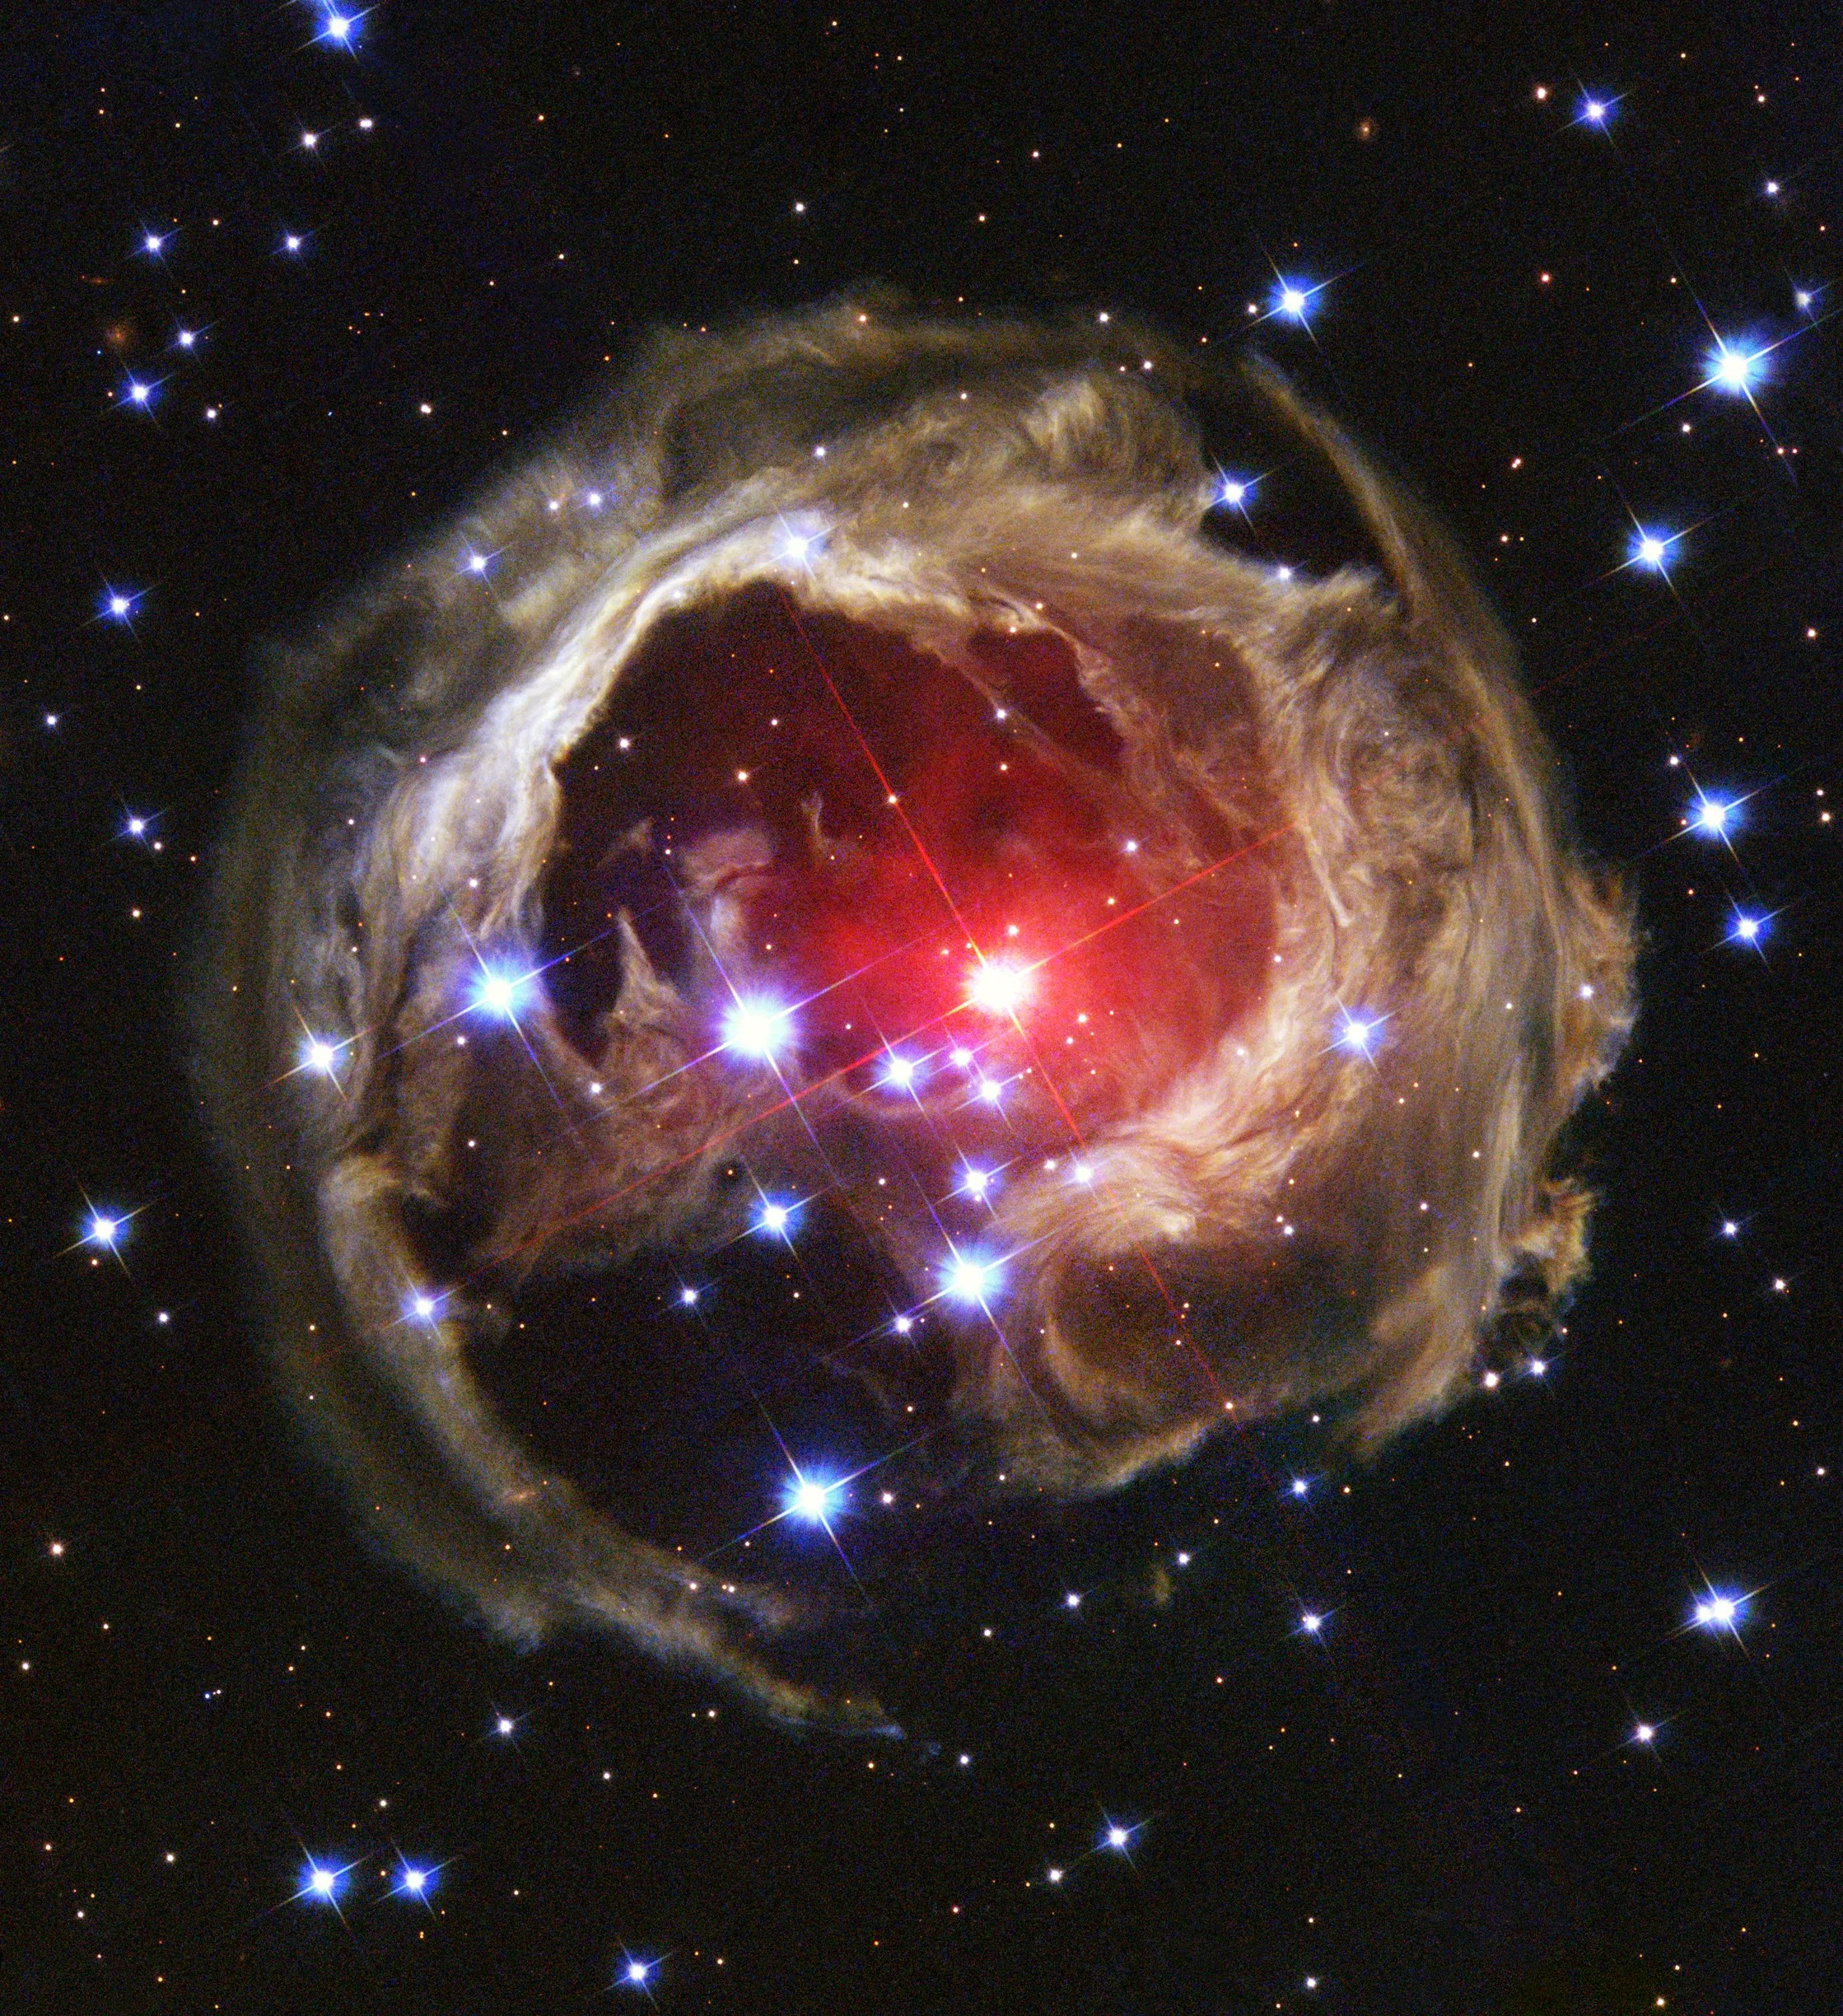 Hubble view of an expanding halo of light around star V838 Monocerotis. Center of the ball-like cloud holds a bright star surrounded by red gas. The outer region of the "ball" is a tan color dotted with stars. Black background dotted with stars.